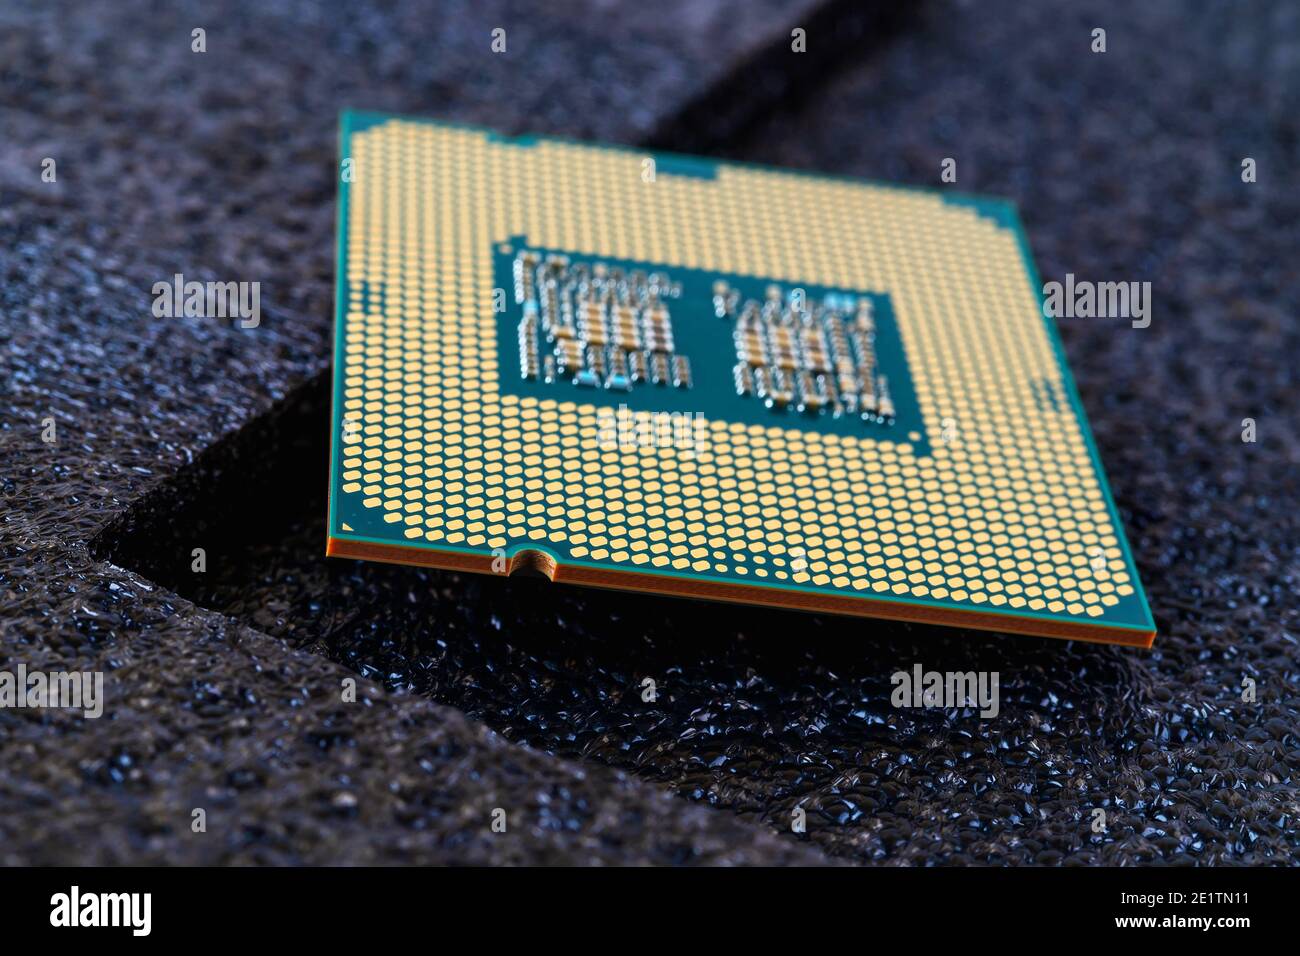 Pc micro CPU with gold plated contacts on a textured dark background. Modern central processing unit close-up. Desktop computer hardware macro. Stock Photo